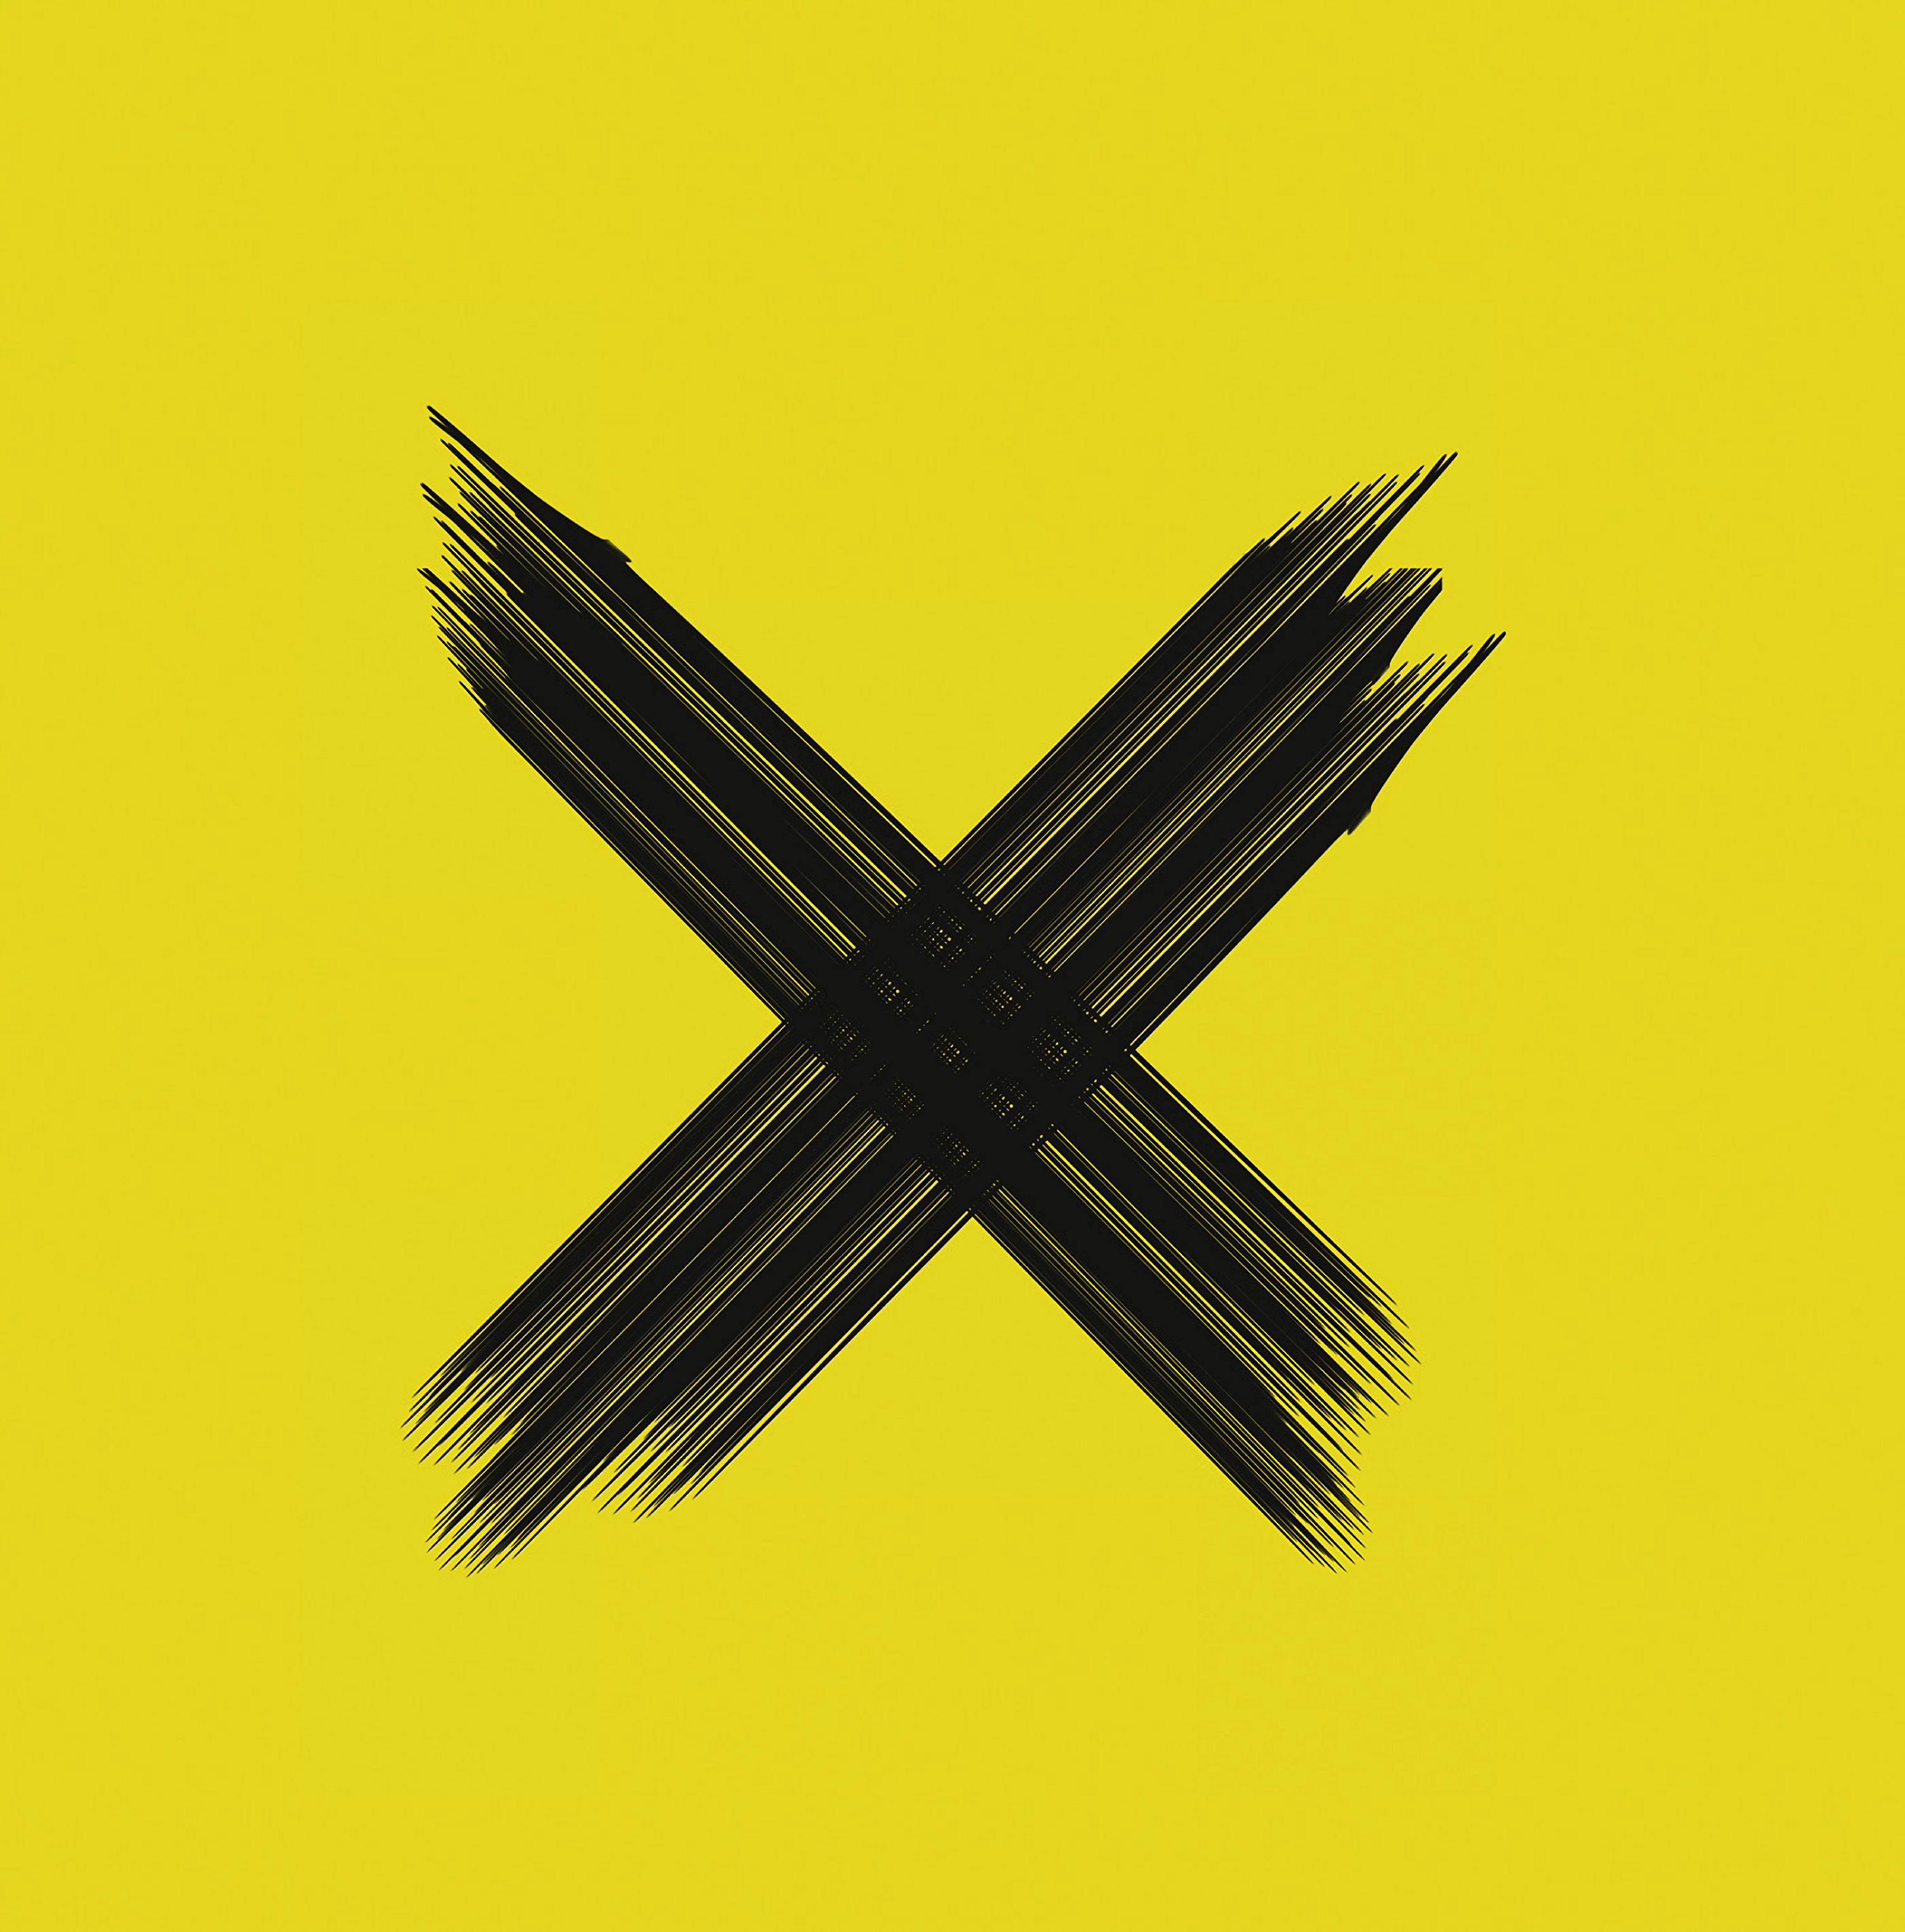 135955 download wallpaper black, yellow, minimalism, symbol, crossing, smears, strokes, intersection, cross, dagger screensavers and pictures for free